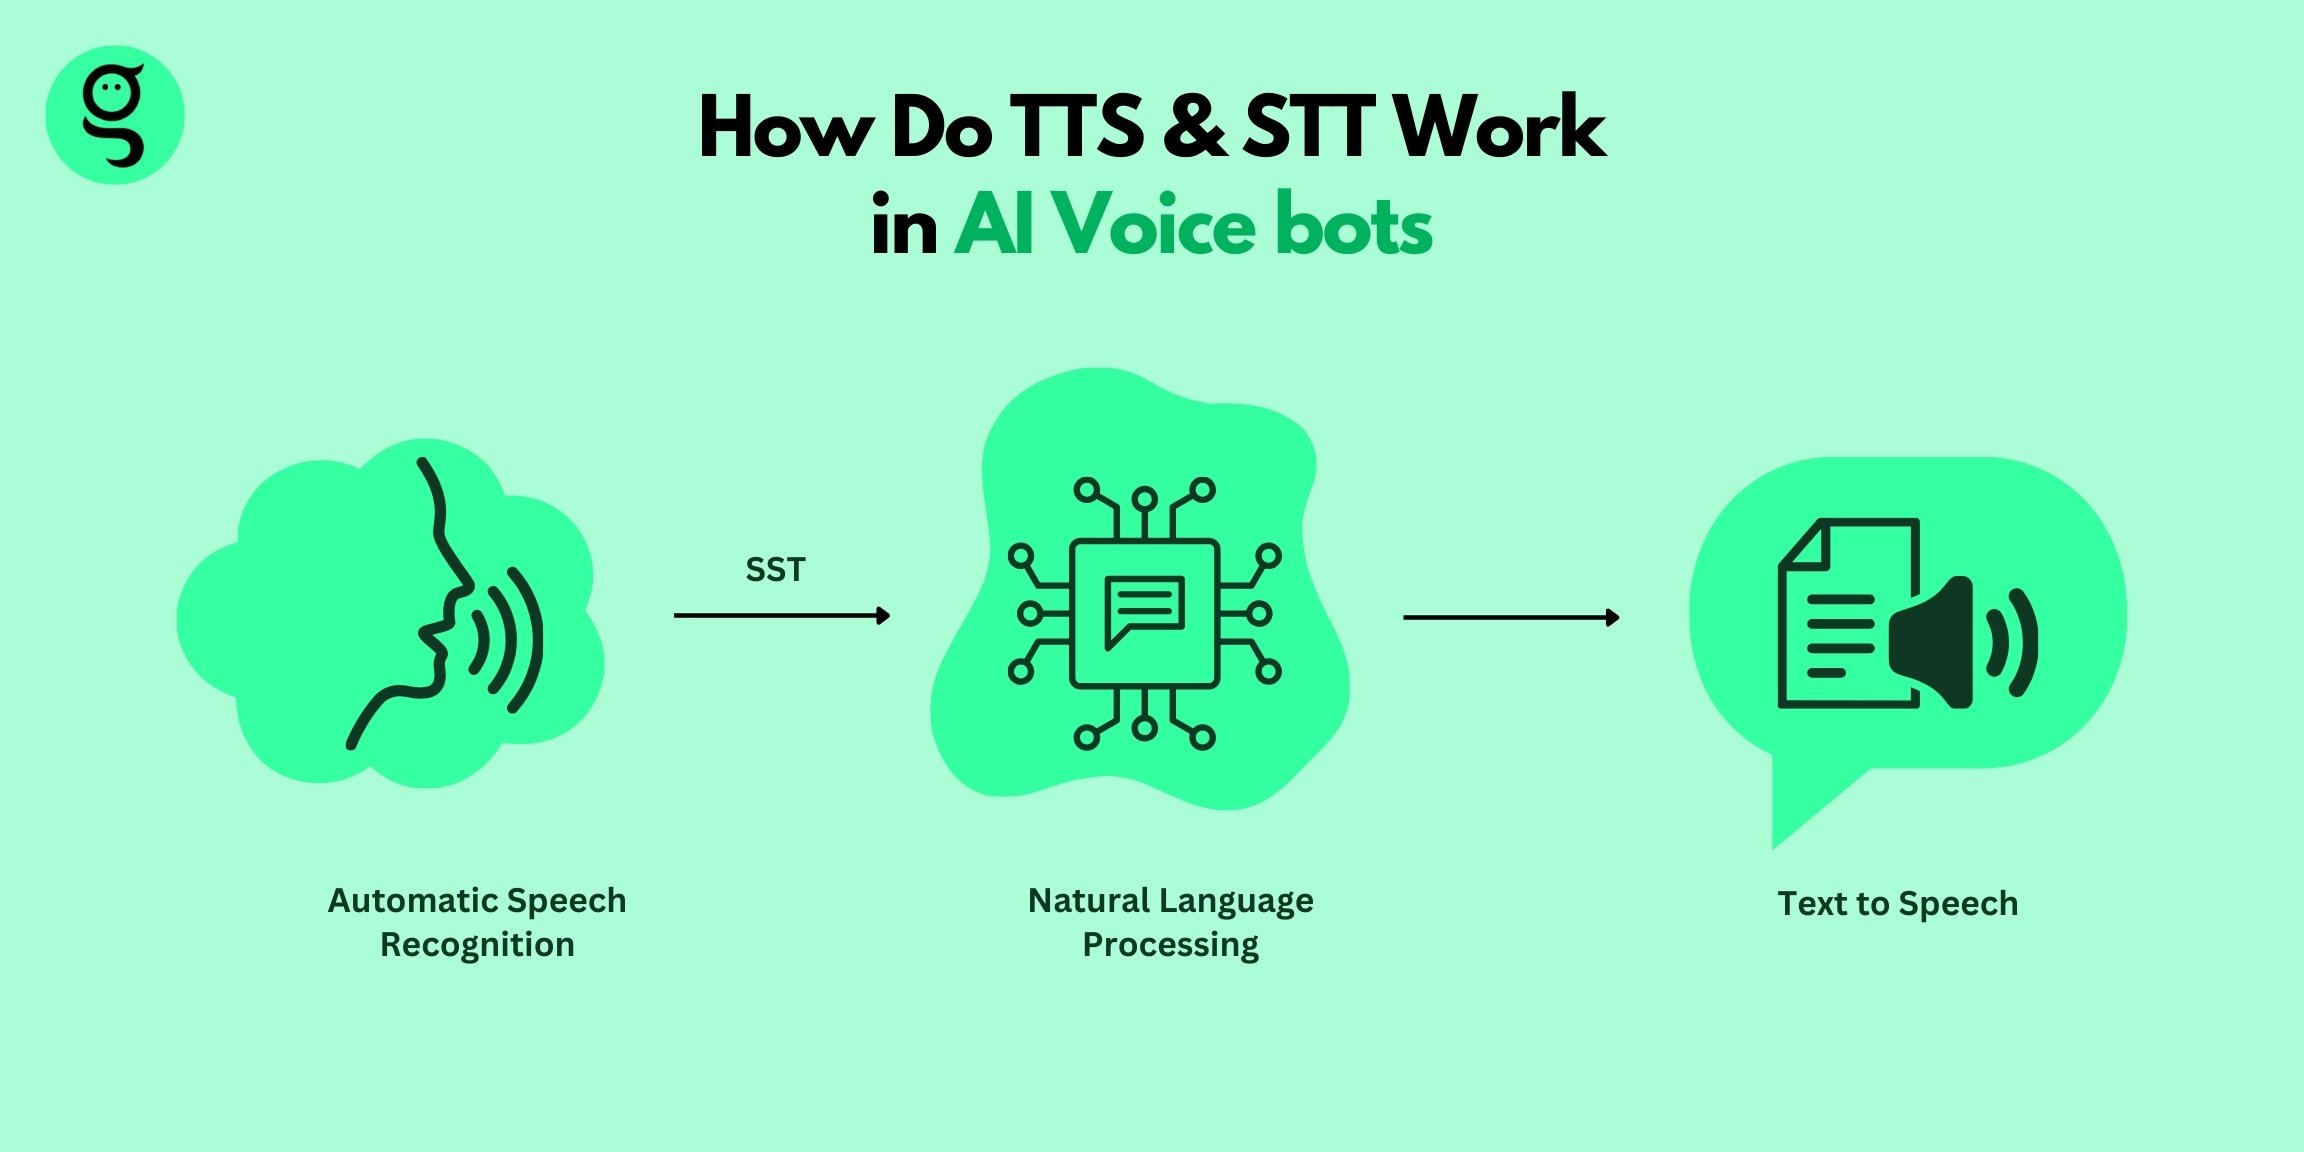 How do TTS and STT work in Voicebots